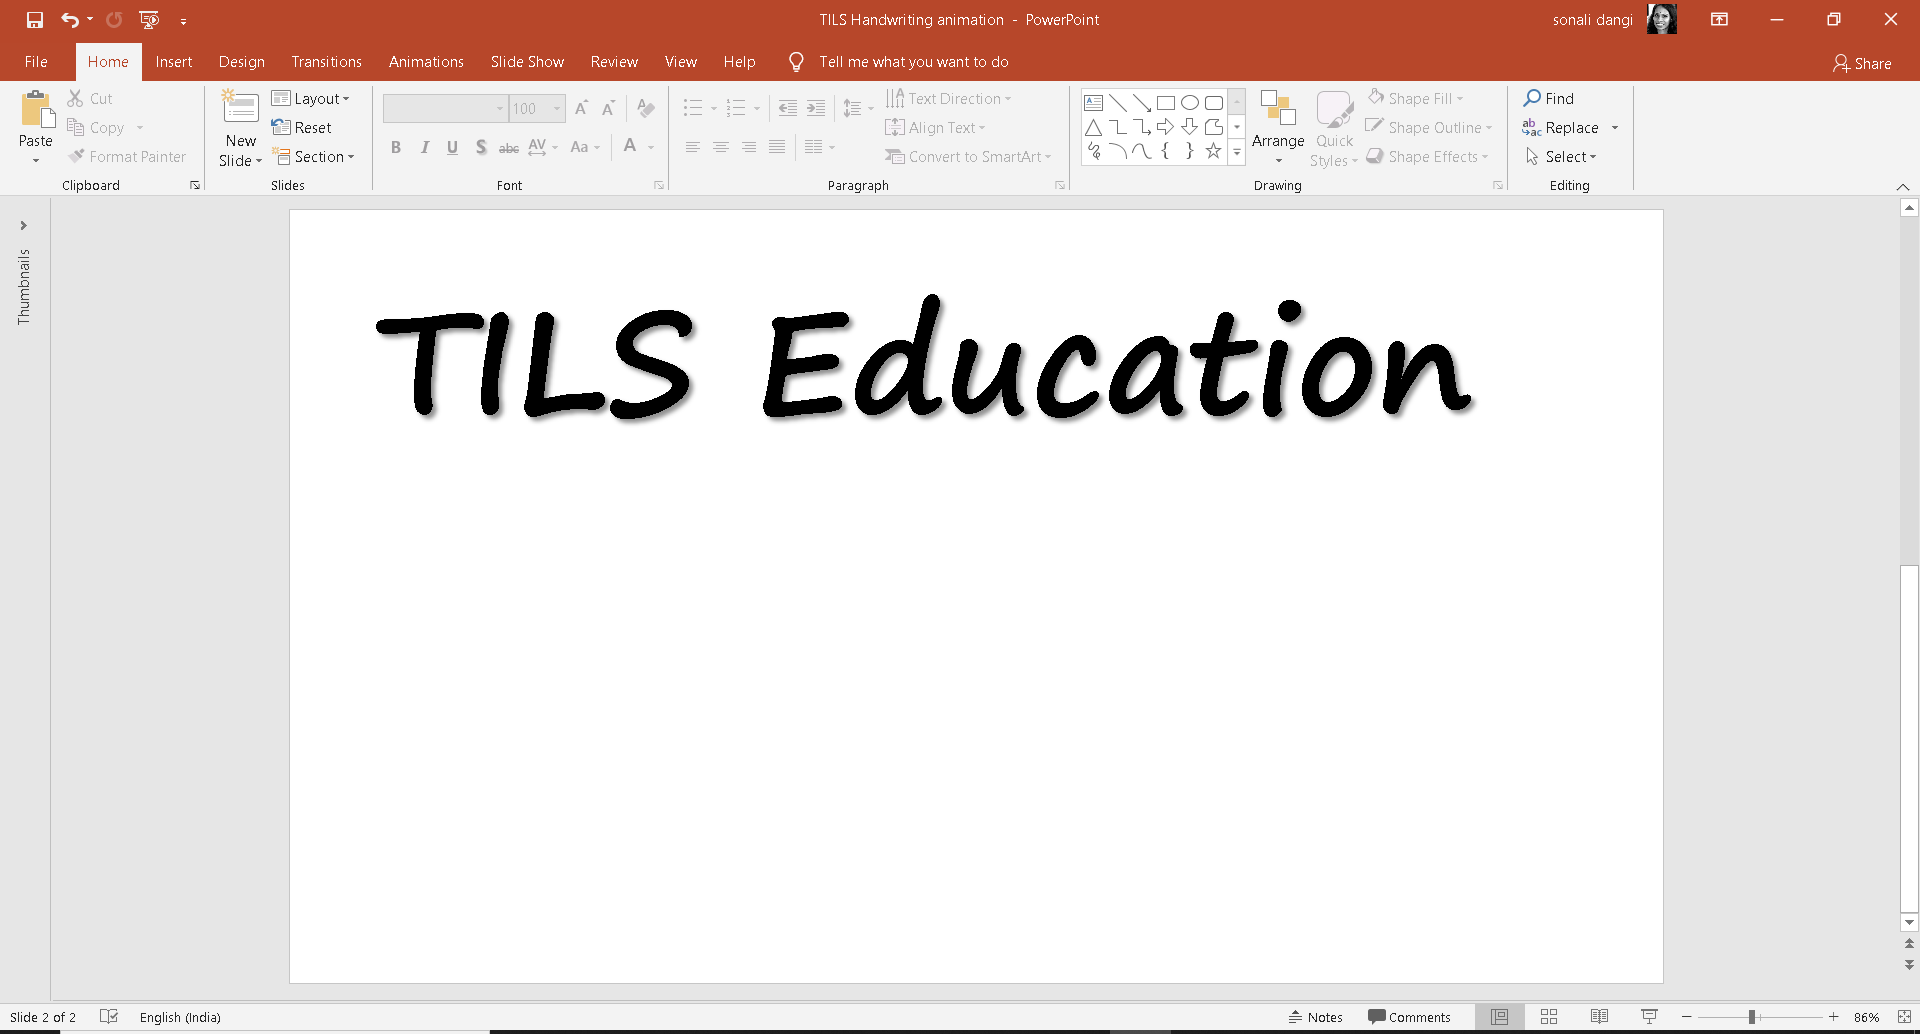 Handwriting text Animation effect in PowerPoint